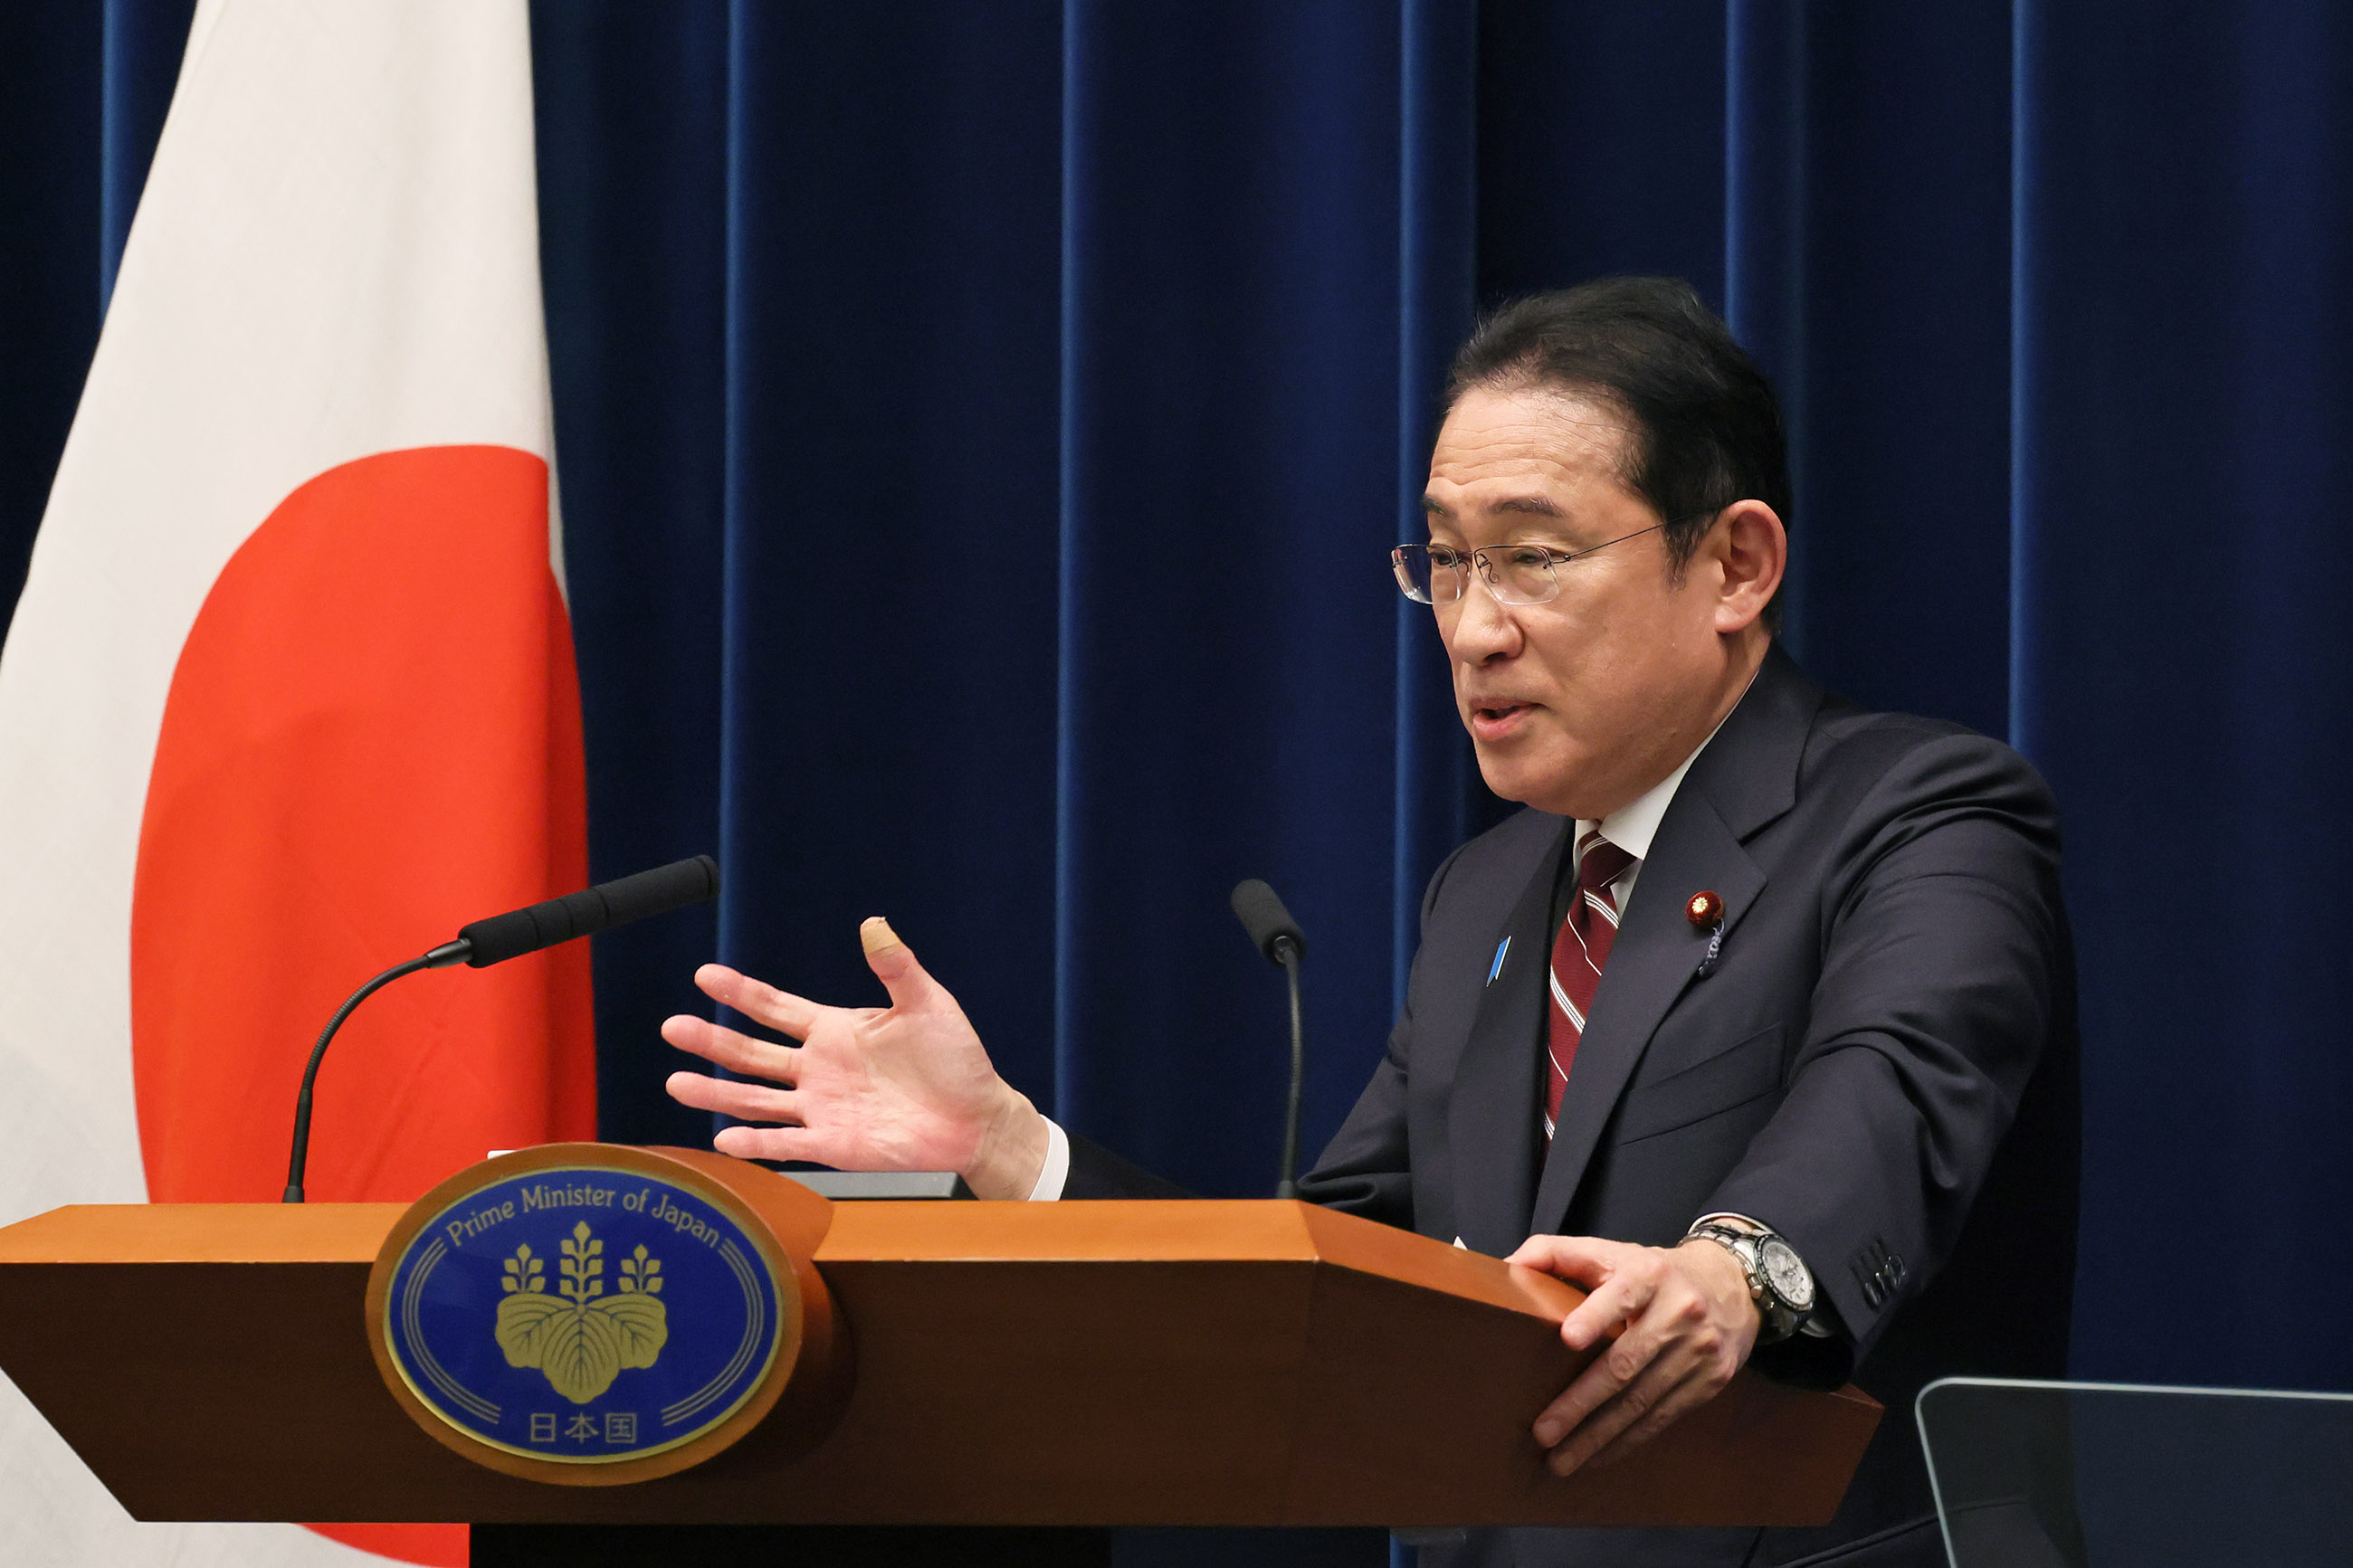 Prime Minister Kishida answering questions from the journalists (5)